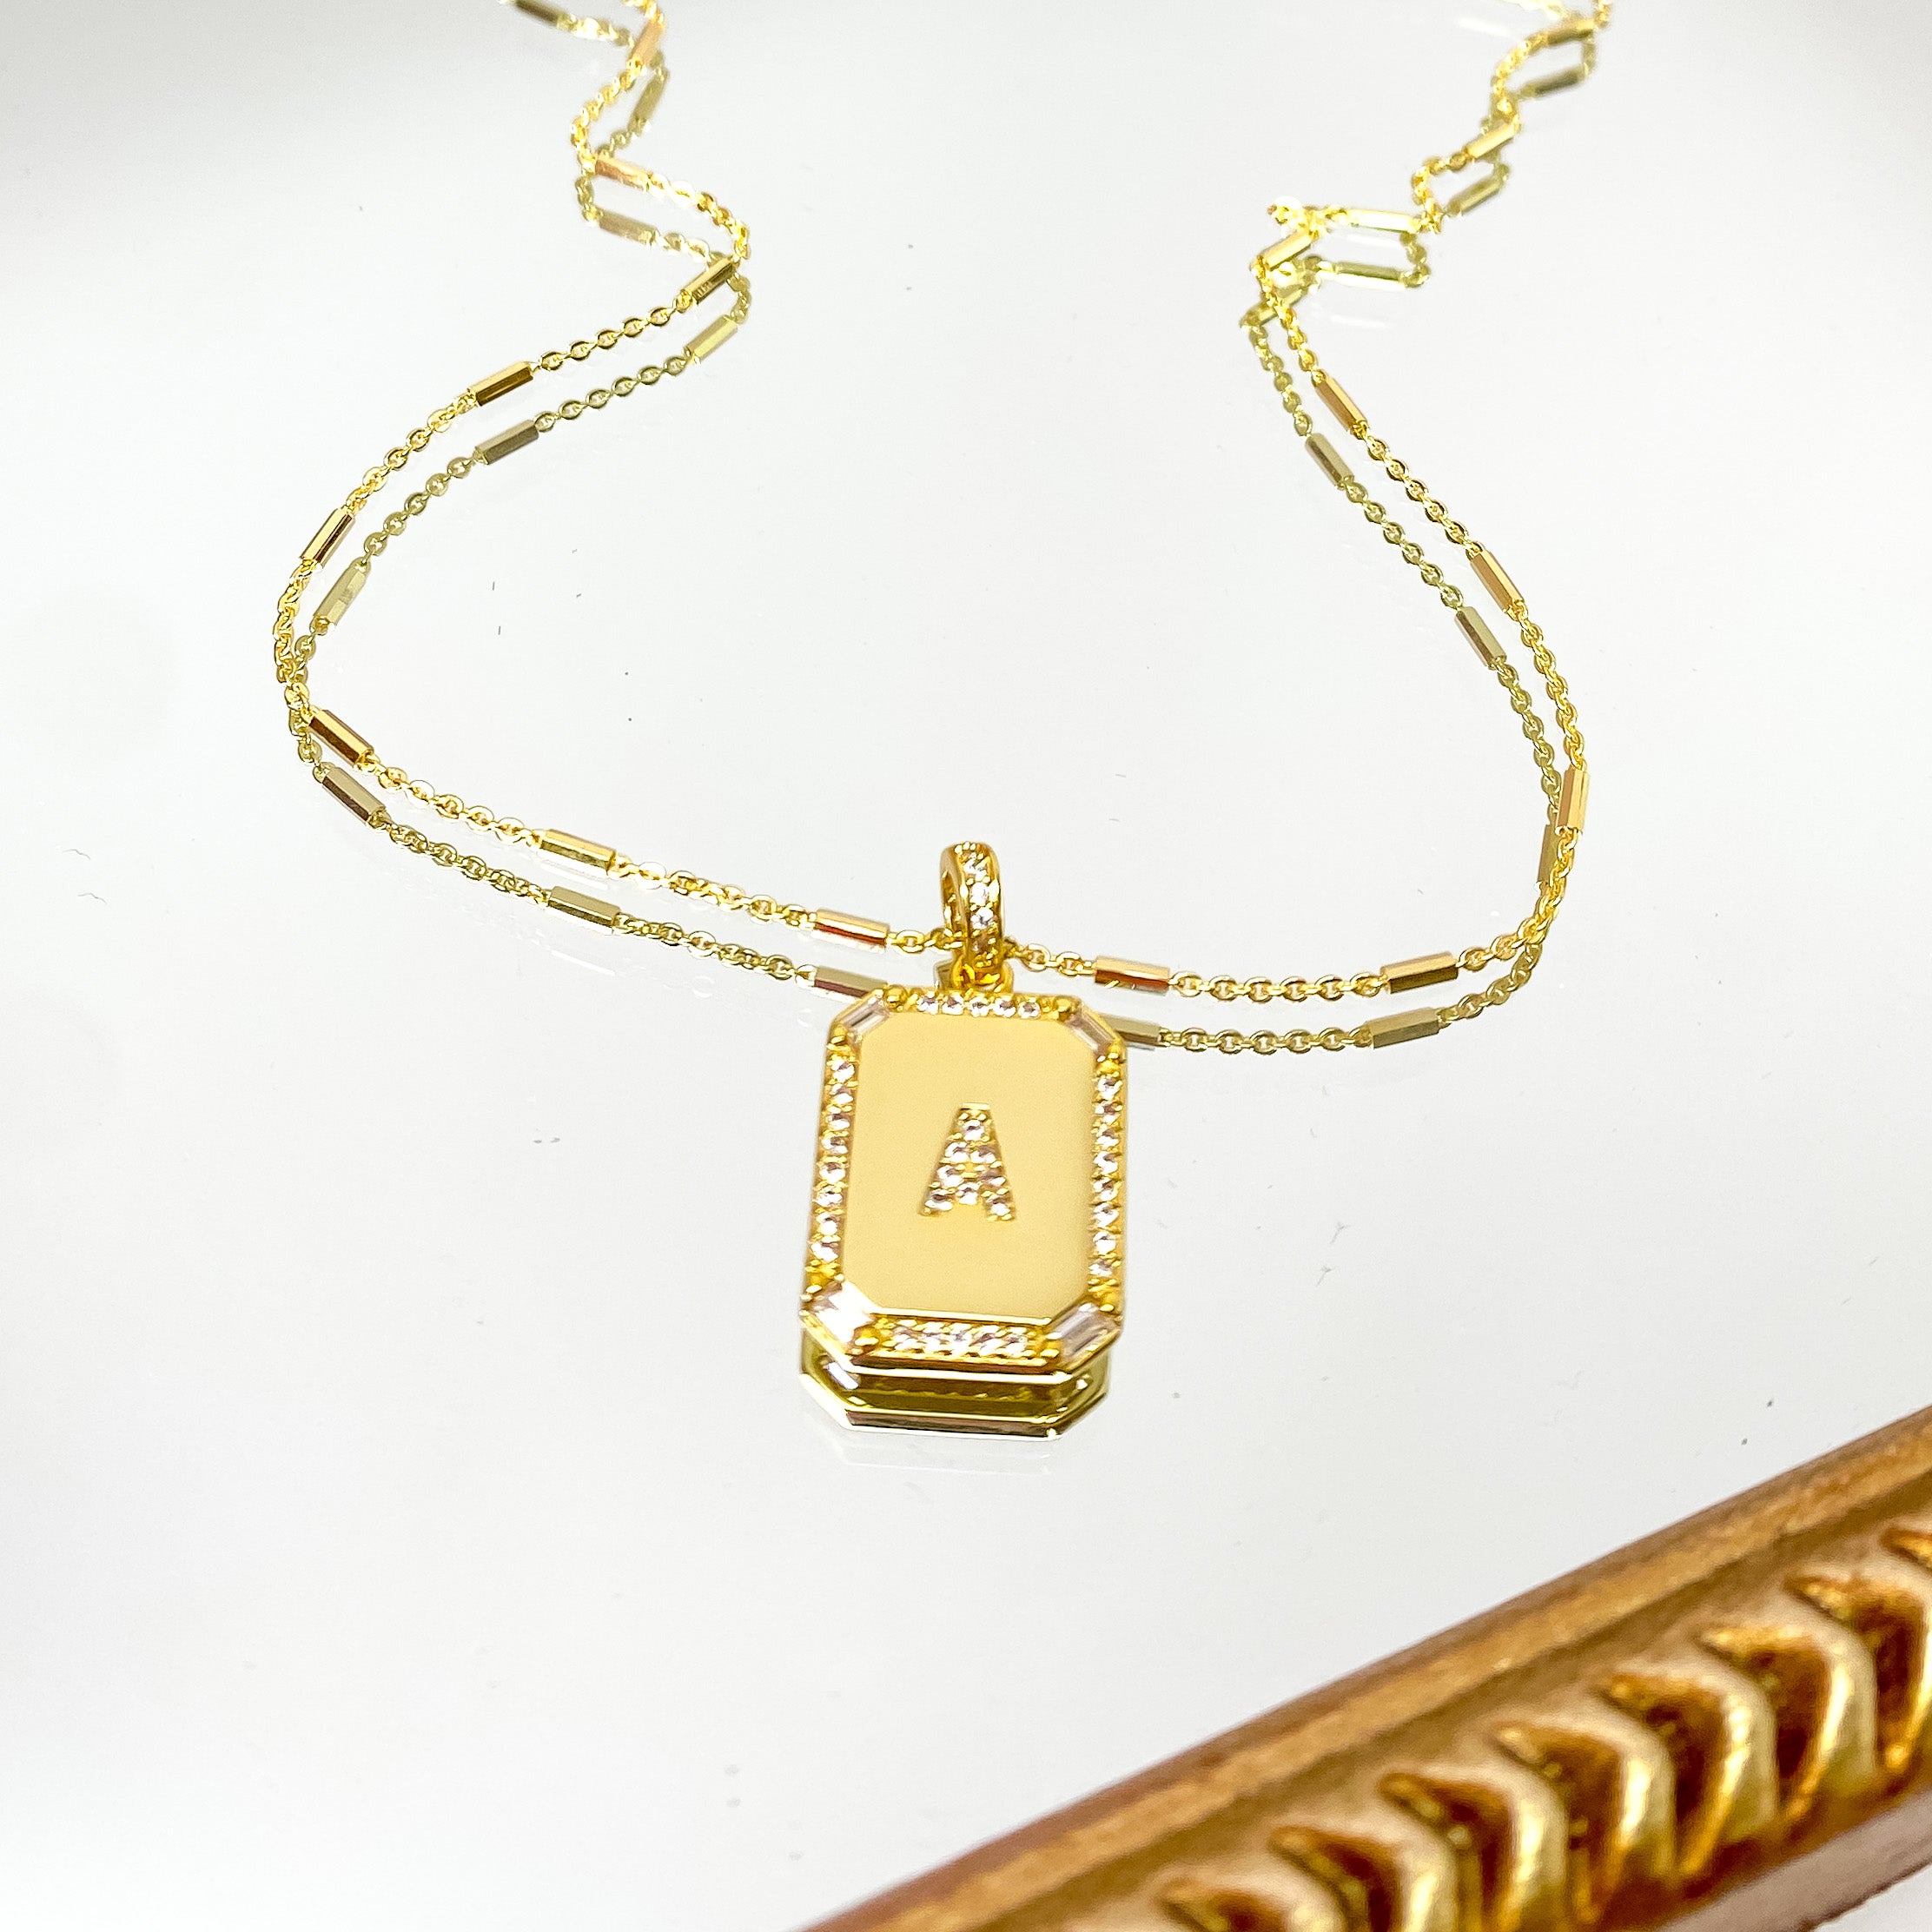 Kinsey Designs | Initial Tile Chain Necklace with CZ Crystals - Giddy Up Glamour Boutique